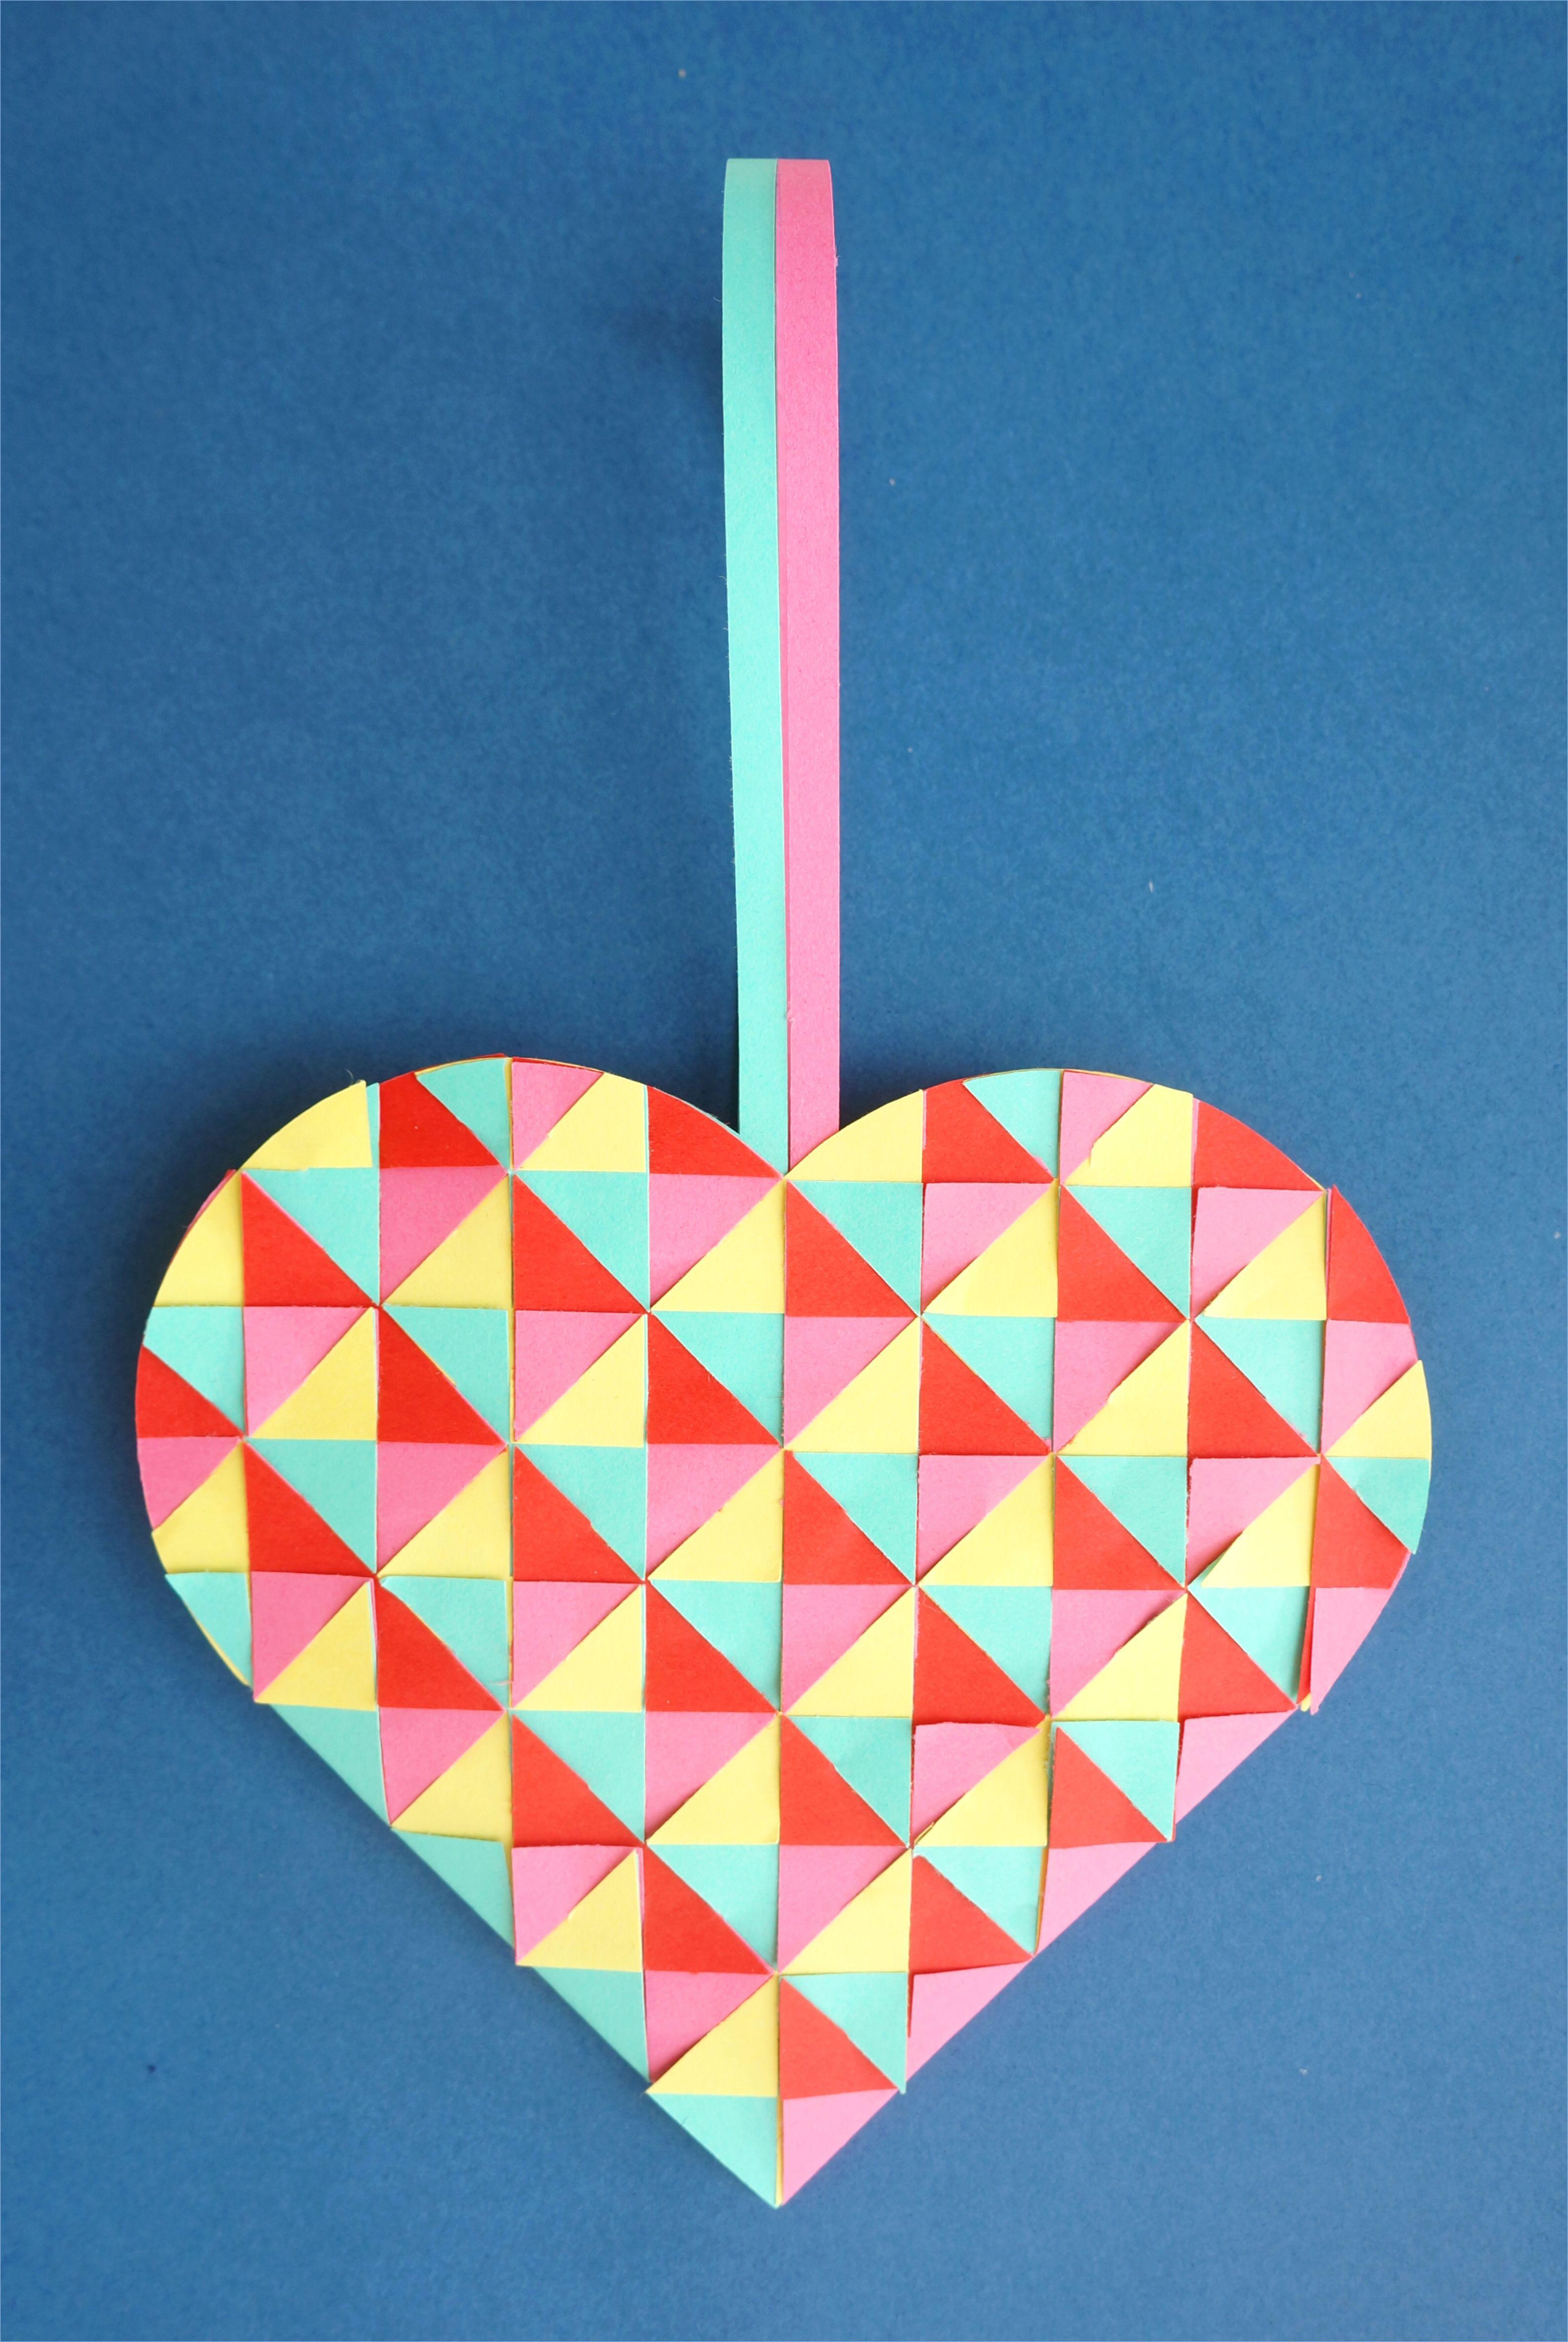 Heart in Triangle Logo - Joined Heart Squares & Triangles